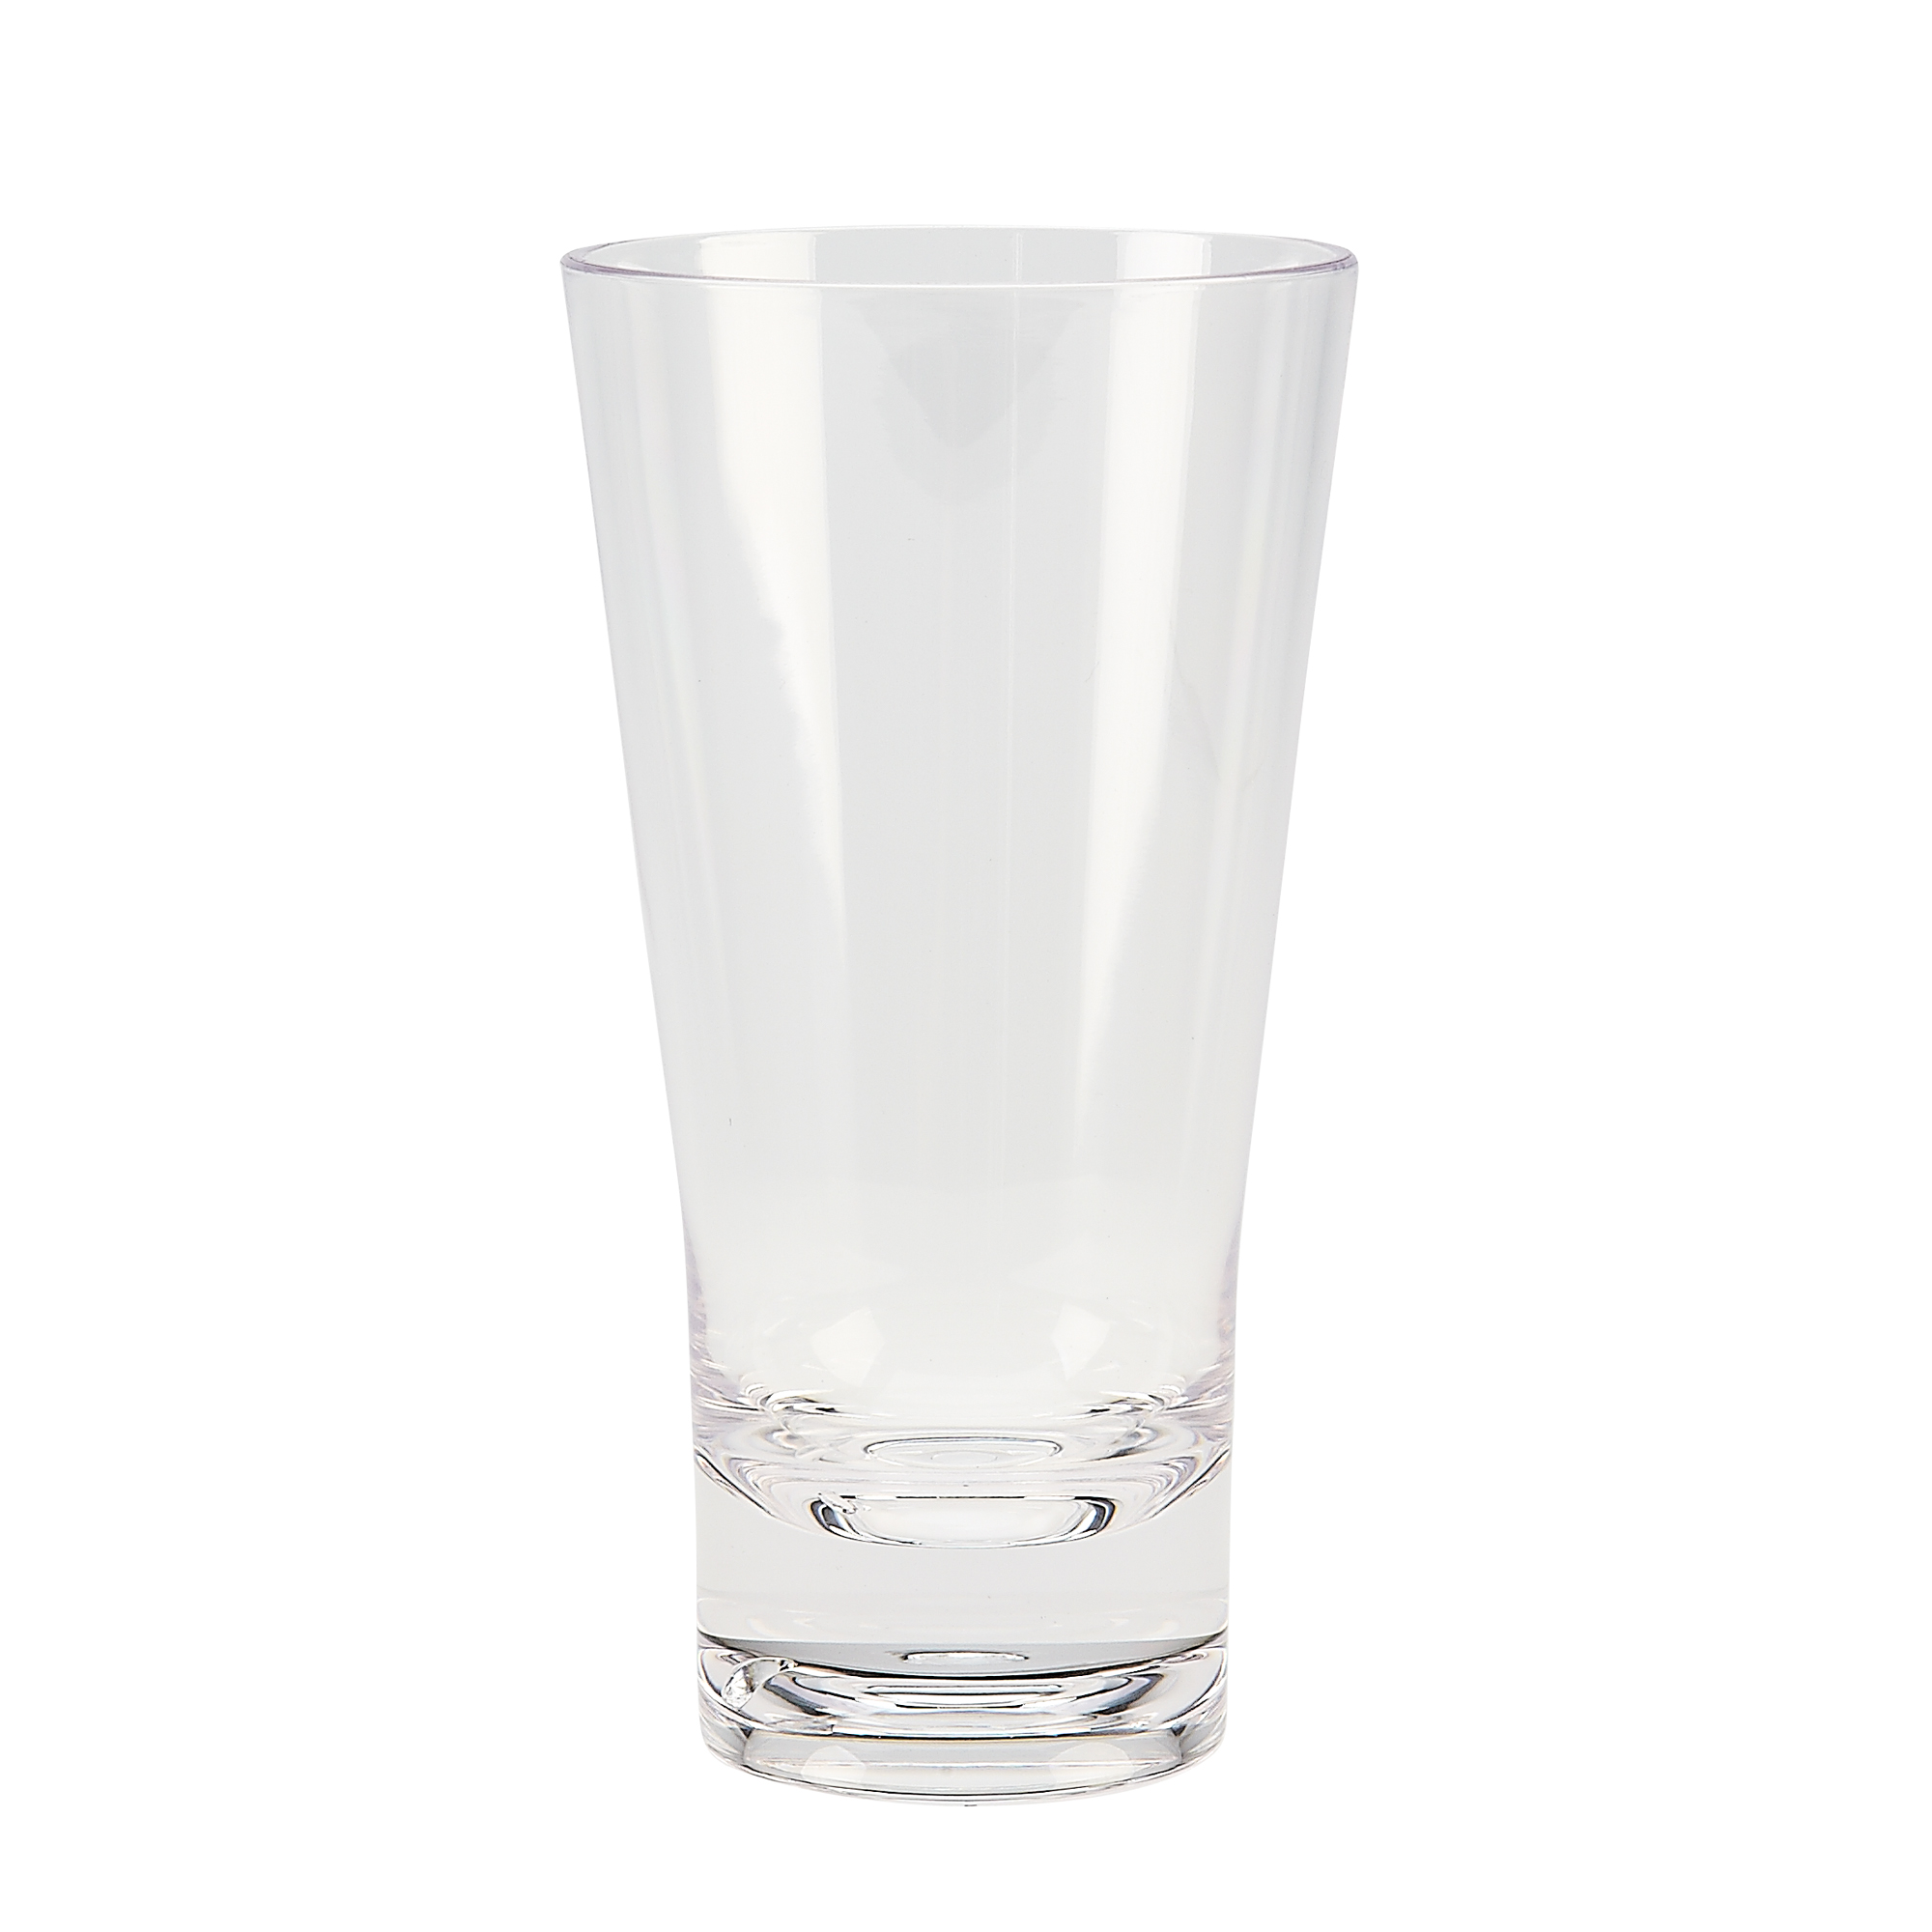 Capri Highball Clear (6619) Polycarbonate Unbreakable Tall drinking glass